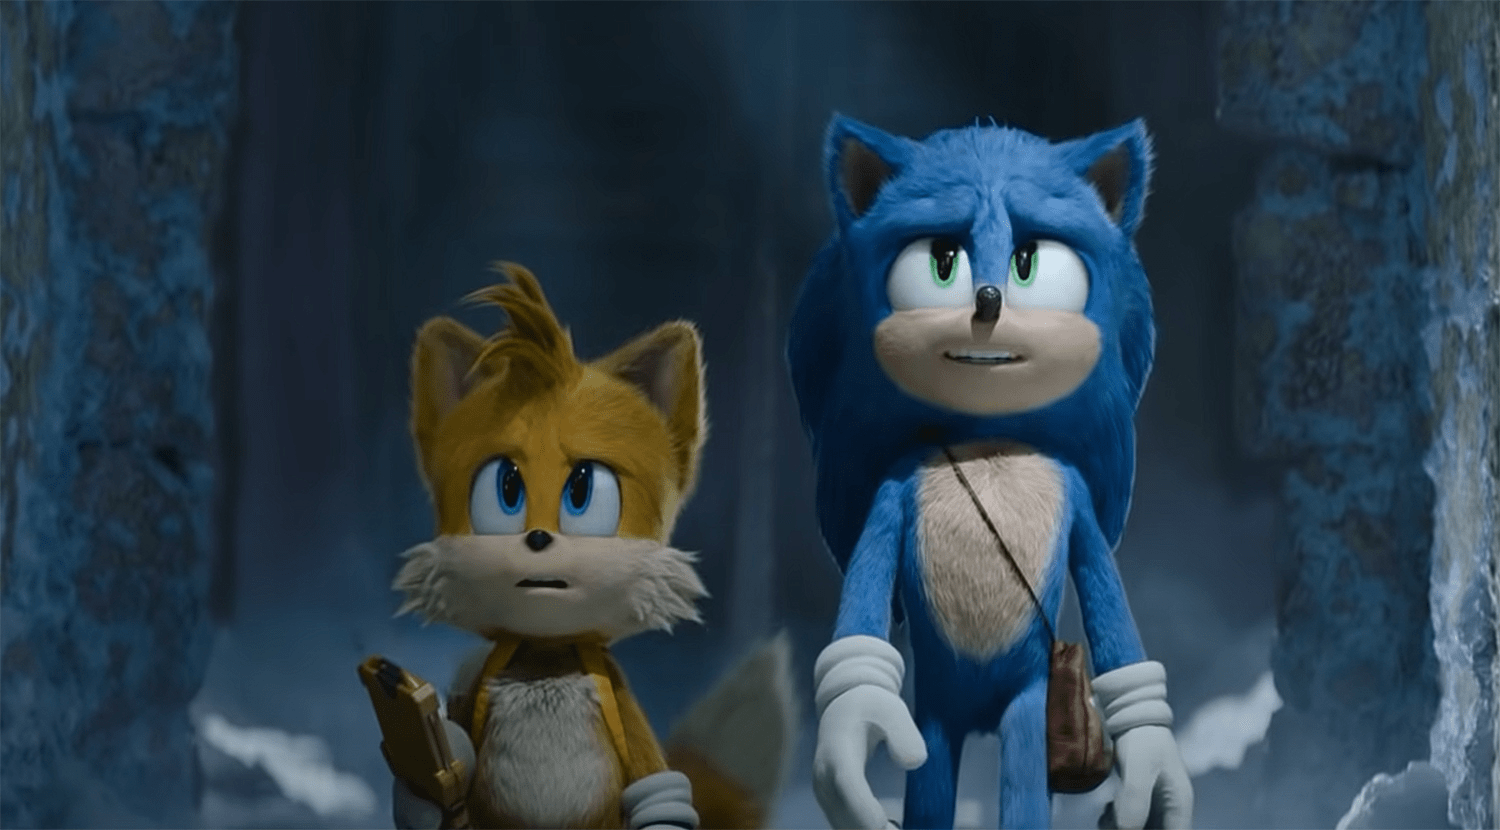 Sonic the Hedgehog 3: Release Date, Trailer, Cast, Plot, where to watch?